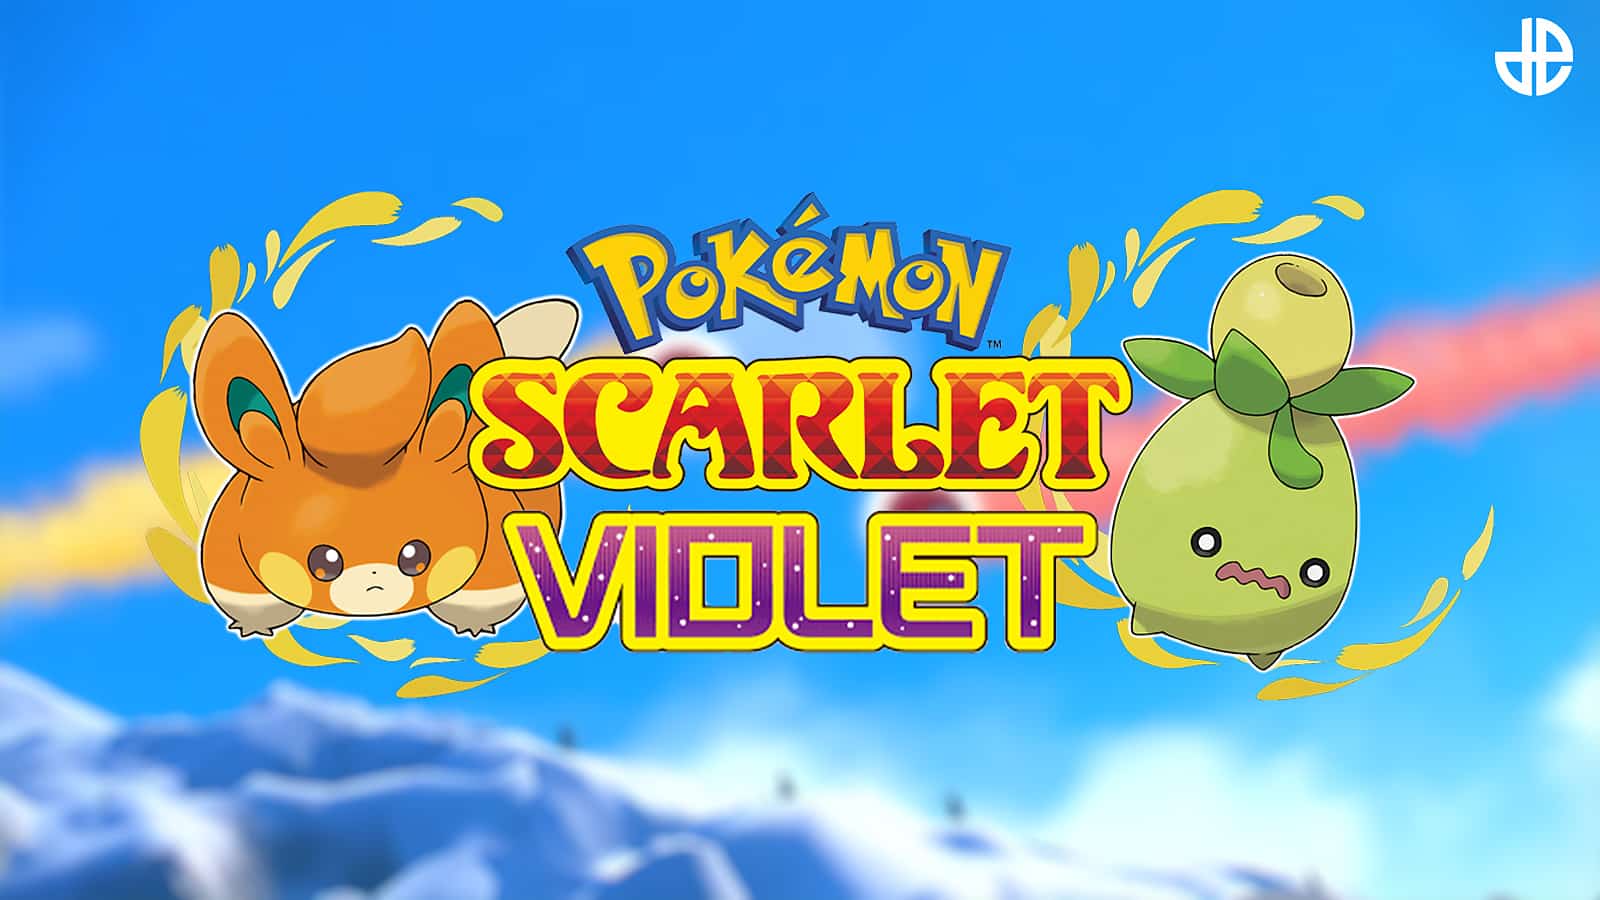 Pokemon Scarlet and Violet's Entire Pokedex Leaks Online With Images